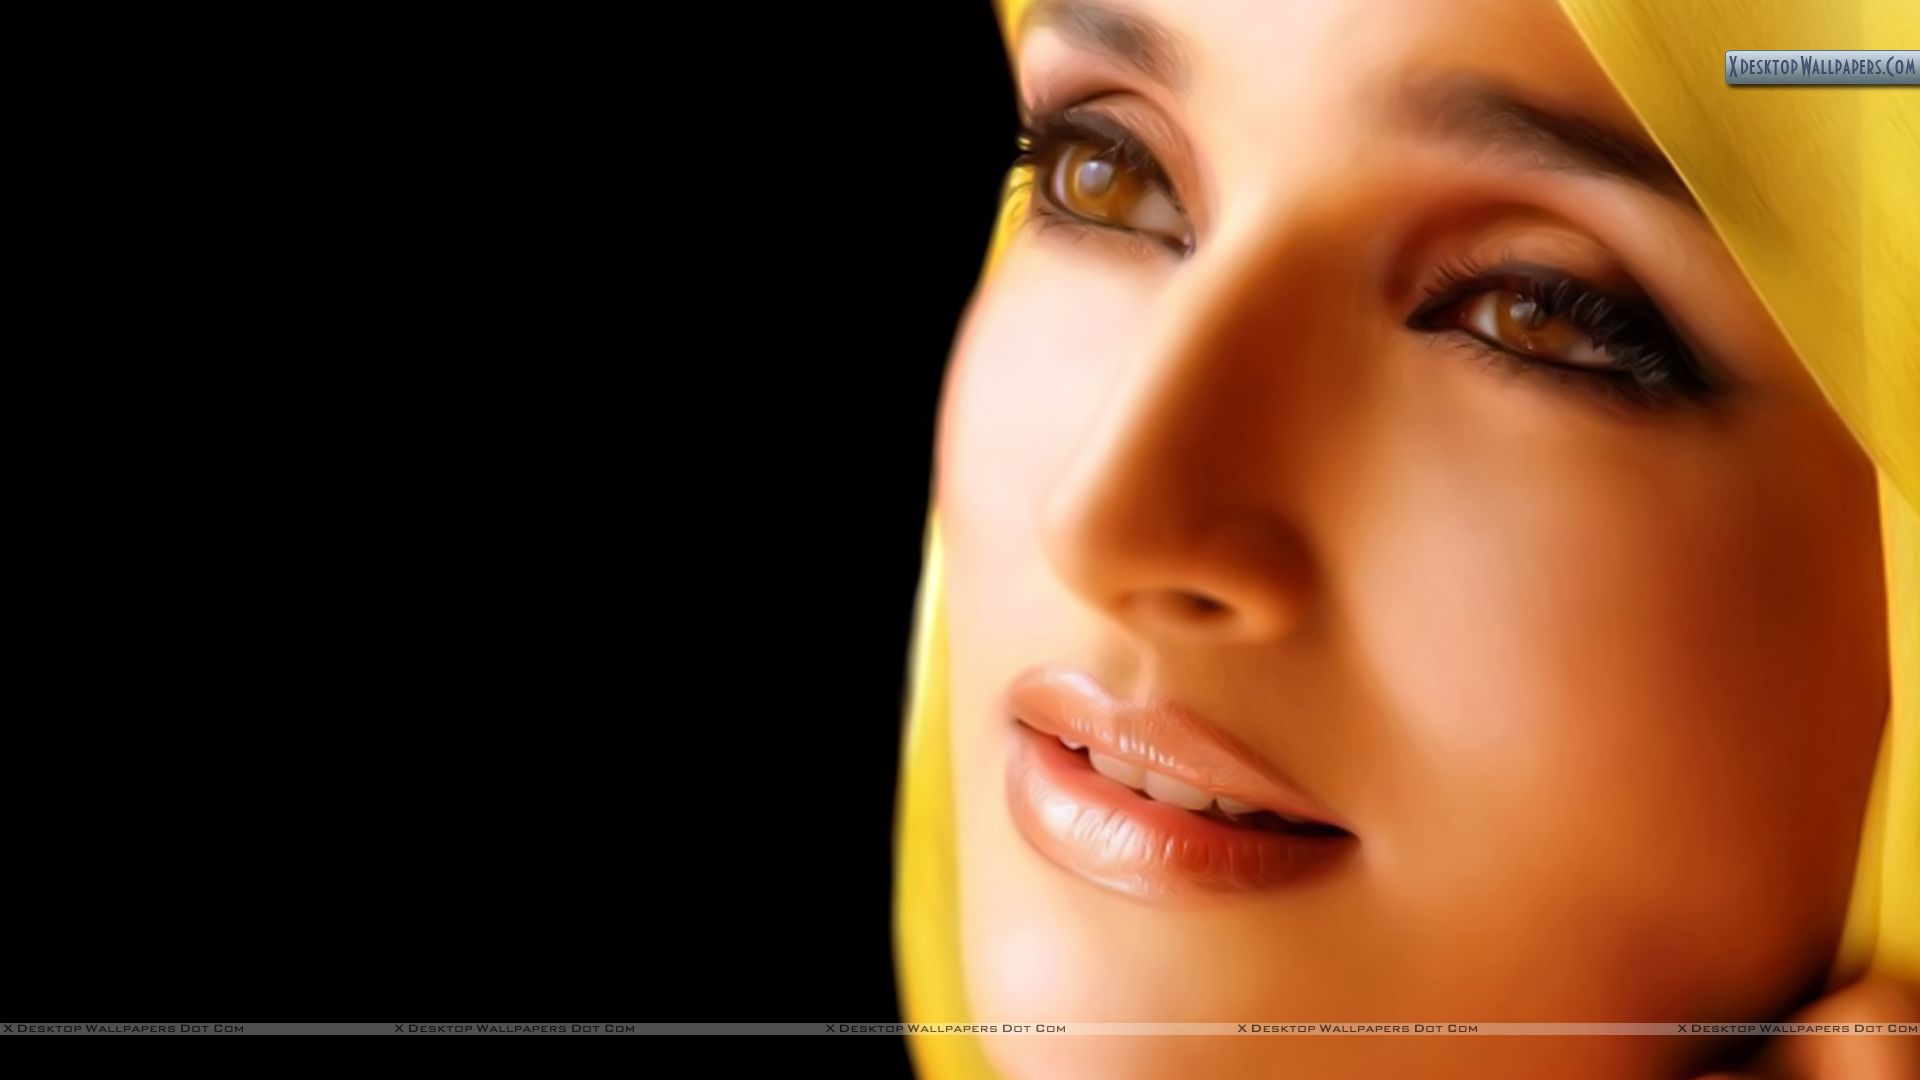 You Are Viewing Wallpaper - Sushma Reddy , HD Wallpaper & Backgrounds